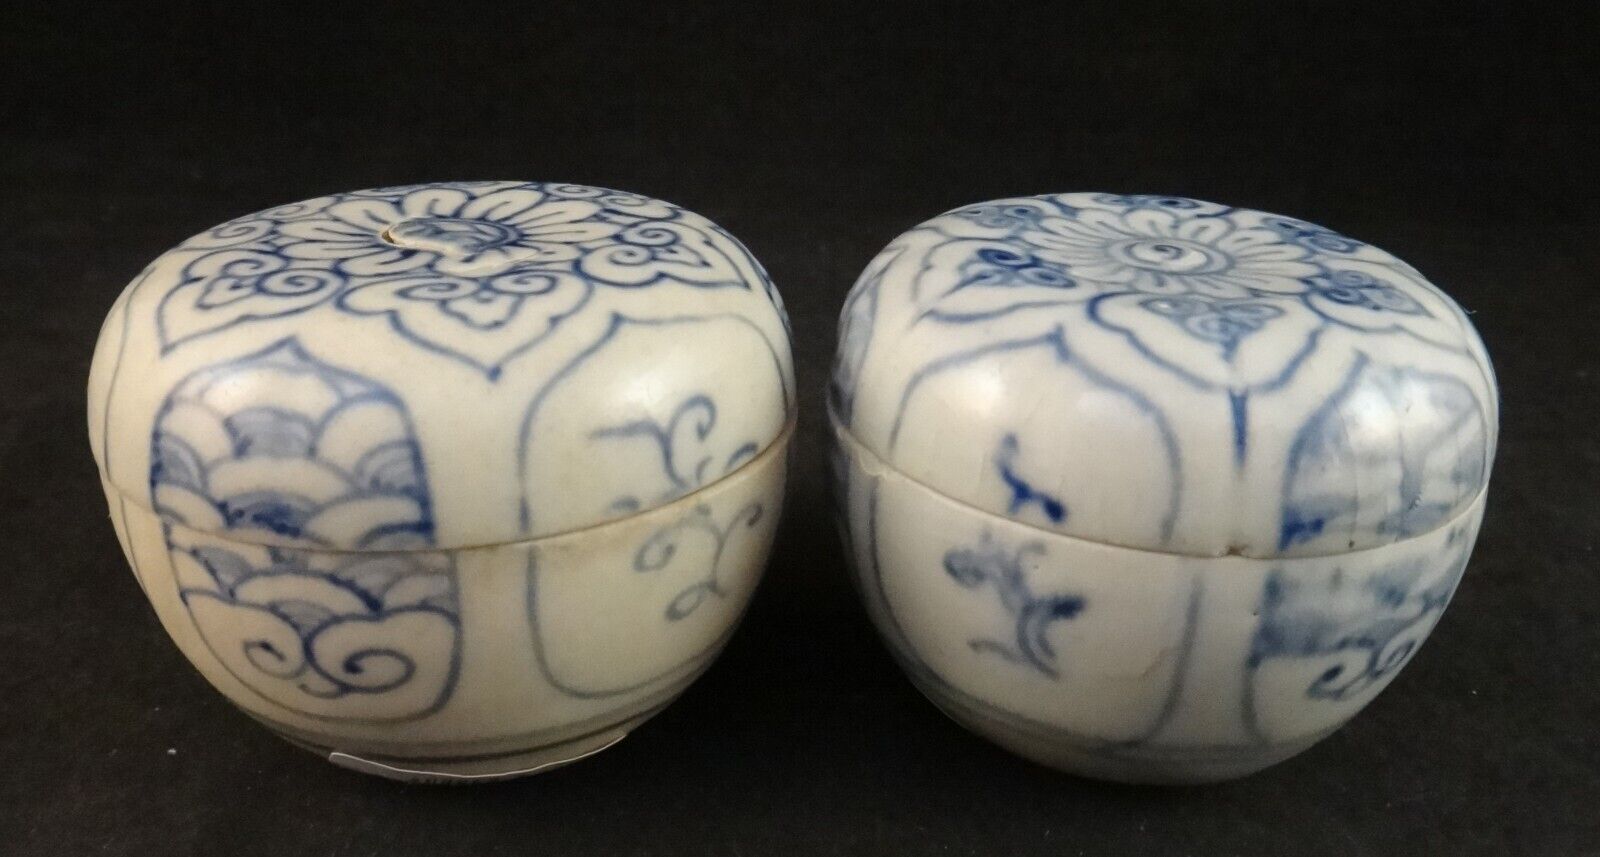 2 Vietnamese Hoi An Hoard Pottery Covered Round Boxes. Lt. 15th C. 2 1/8” D.